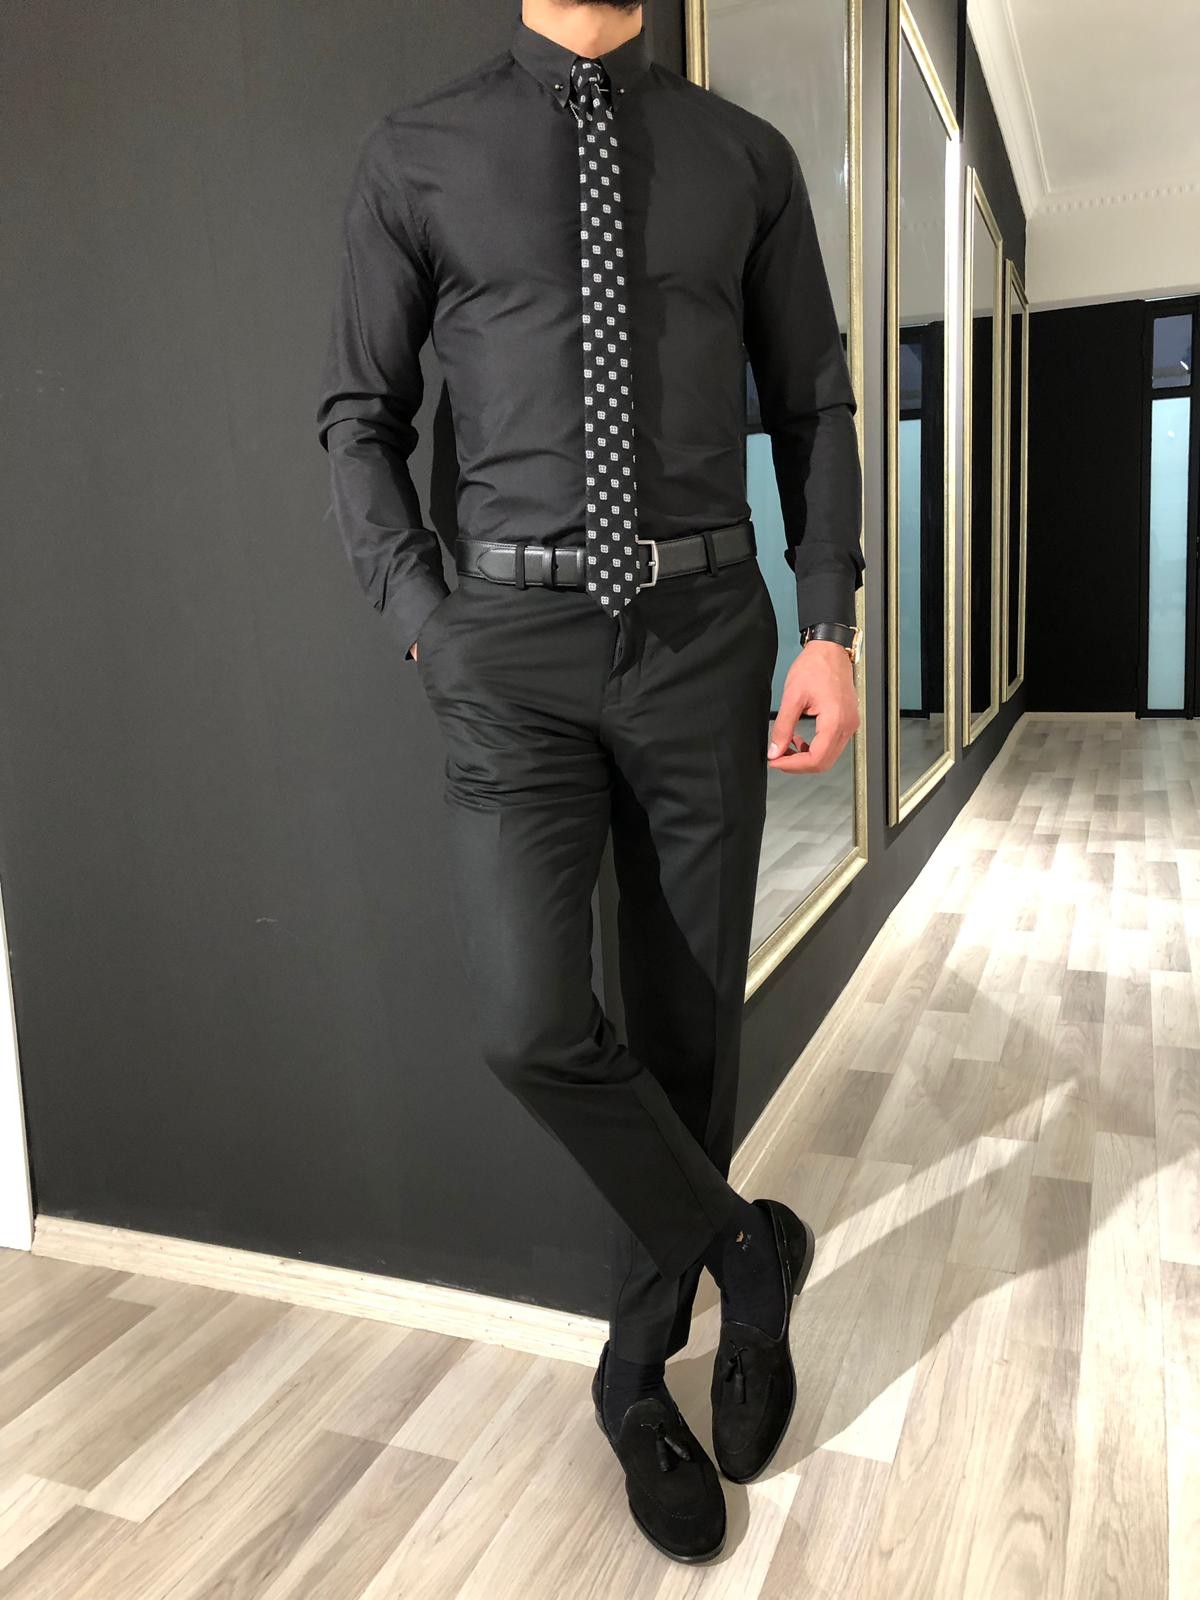 What To Wear With Black Dress Shirt | lupon.gov.ph